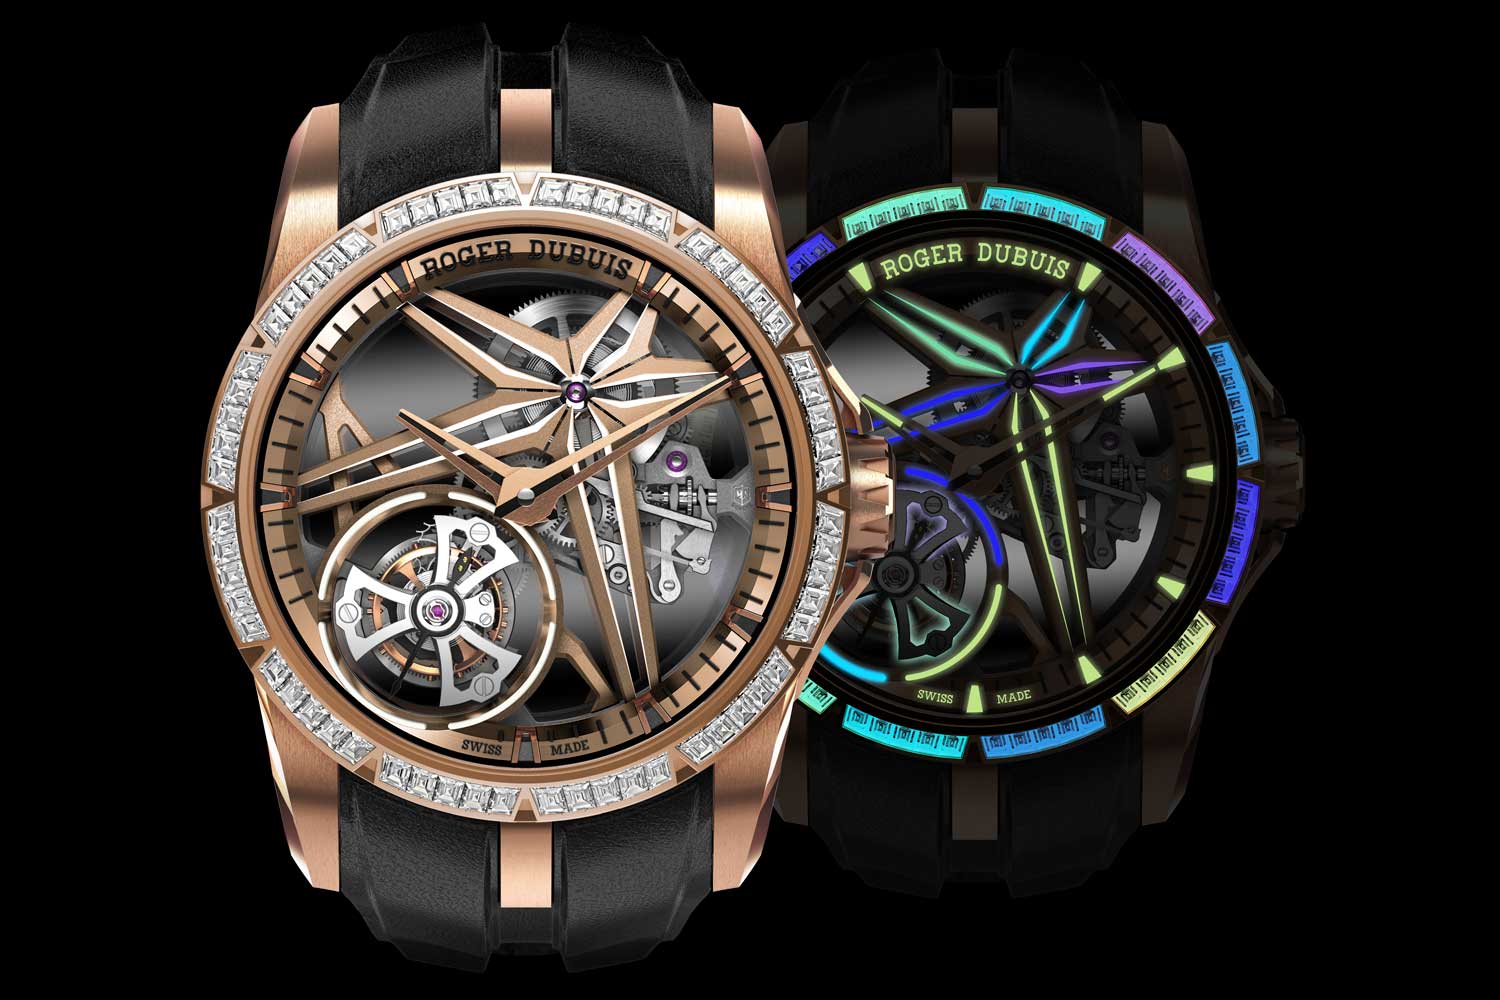 Limited to just eight pieces, the Excalibur Glow Me Up! is a stunning new single flying tourbillon with a bezel set with 60 baguette-cut diamond